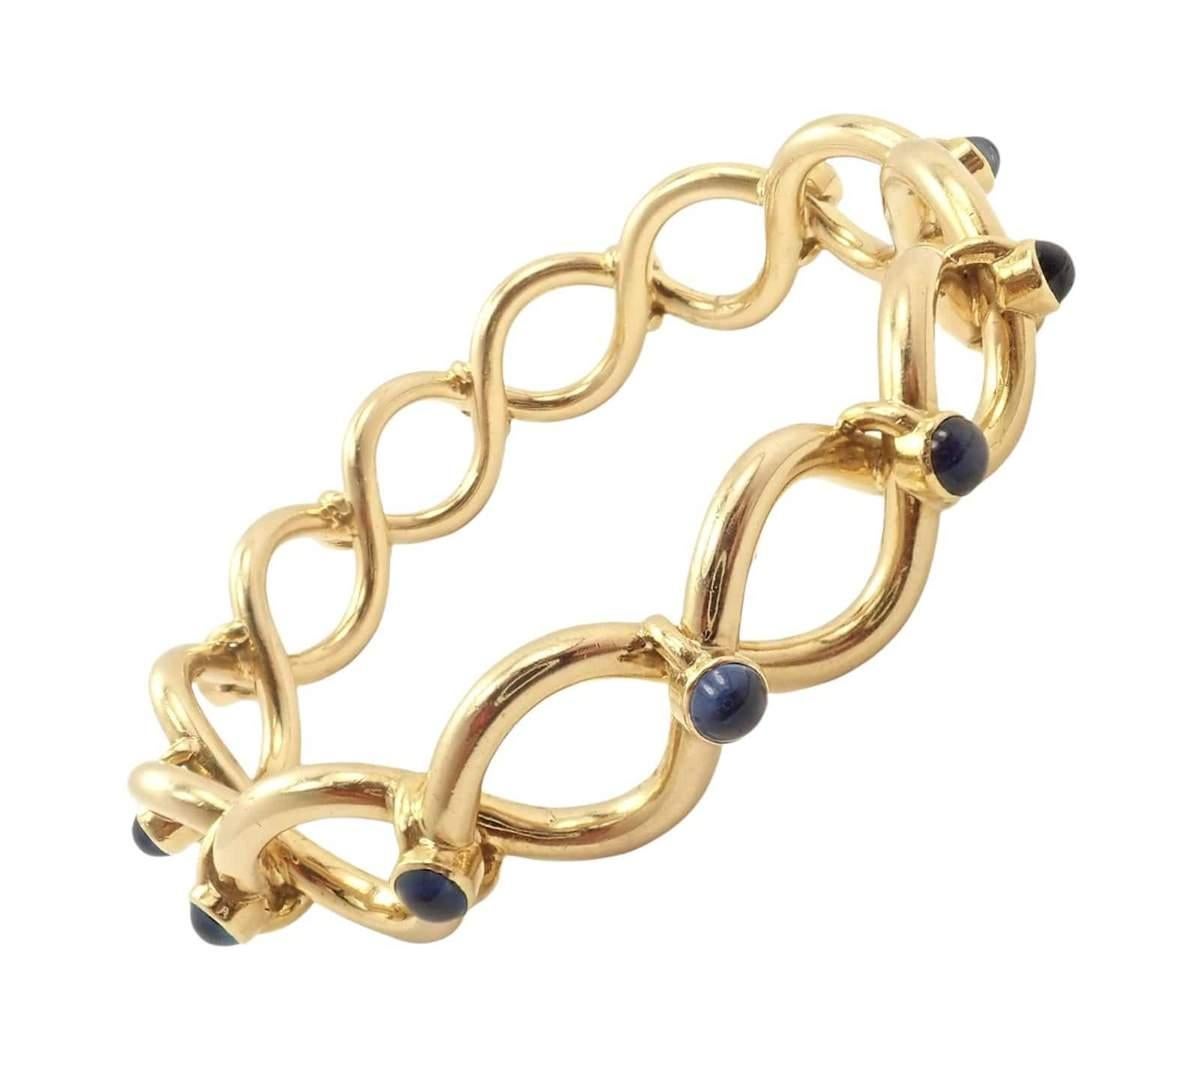 This is a Rare & Vintage Tiffany & Co. 18k Yellow Gold Blue Sapphire Bangle Bracelet. 
This Tiffany Bracelet was Made in France.
Metal: 18k Yellow Gold
Length: 7.25